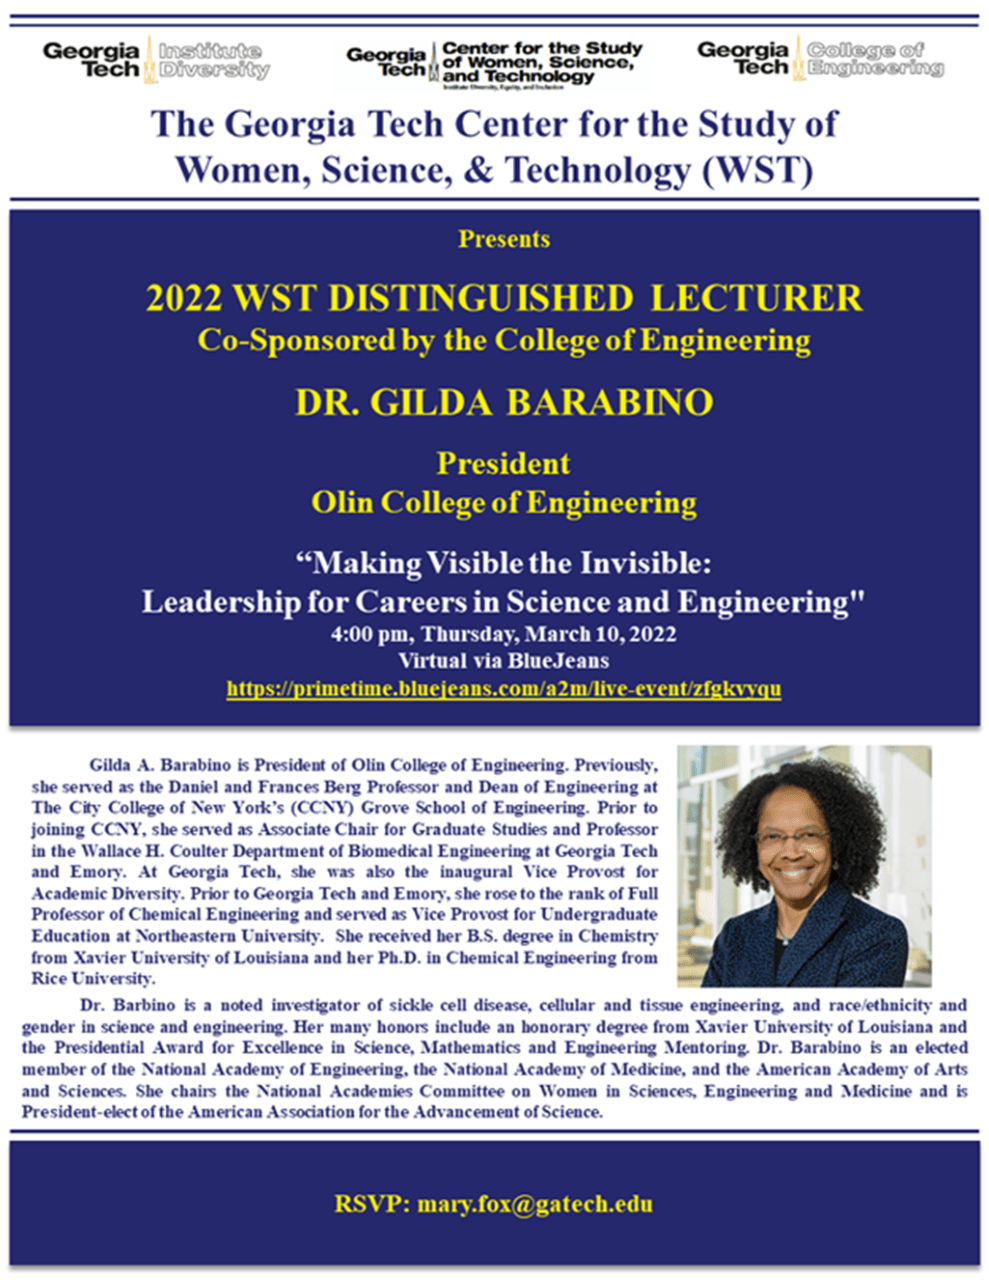 2022 Women, Science, Technology Distinguished Lecture - Co-Sponsored by College of Engineering